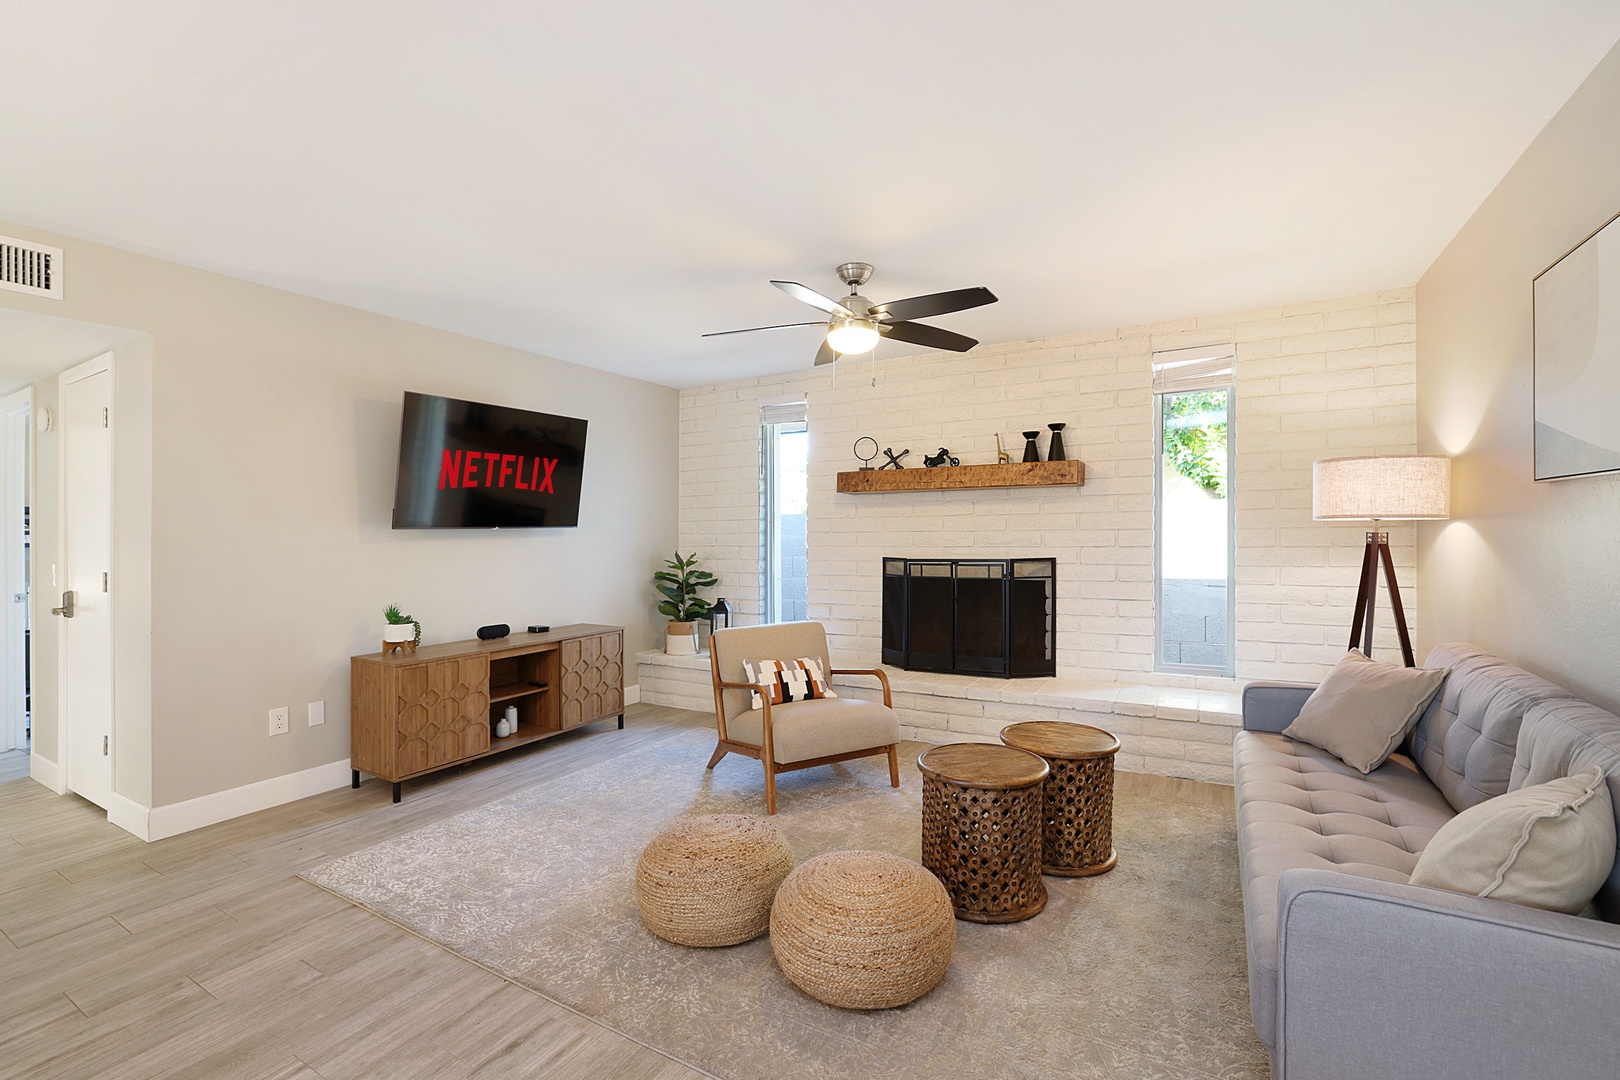 You'll find a comfortable sofa and additional seating along with a huge flat screen tv connected to streaming services.